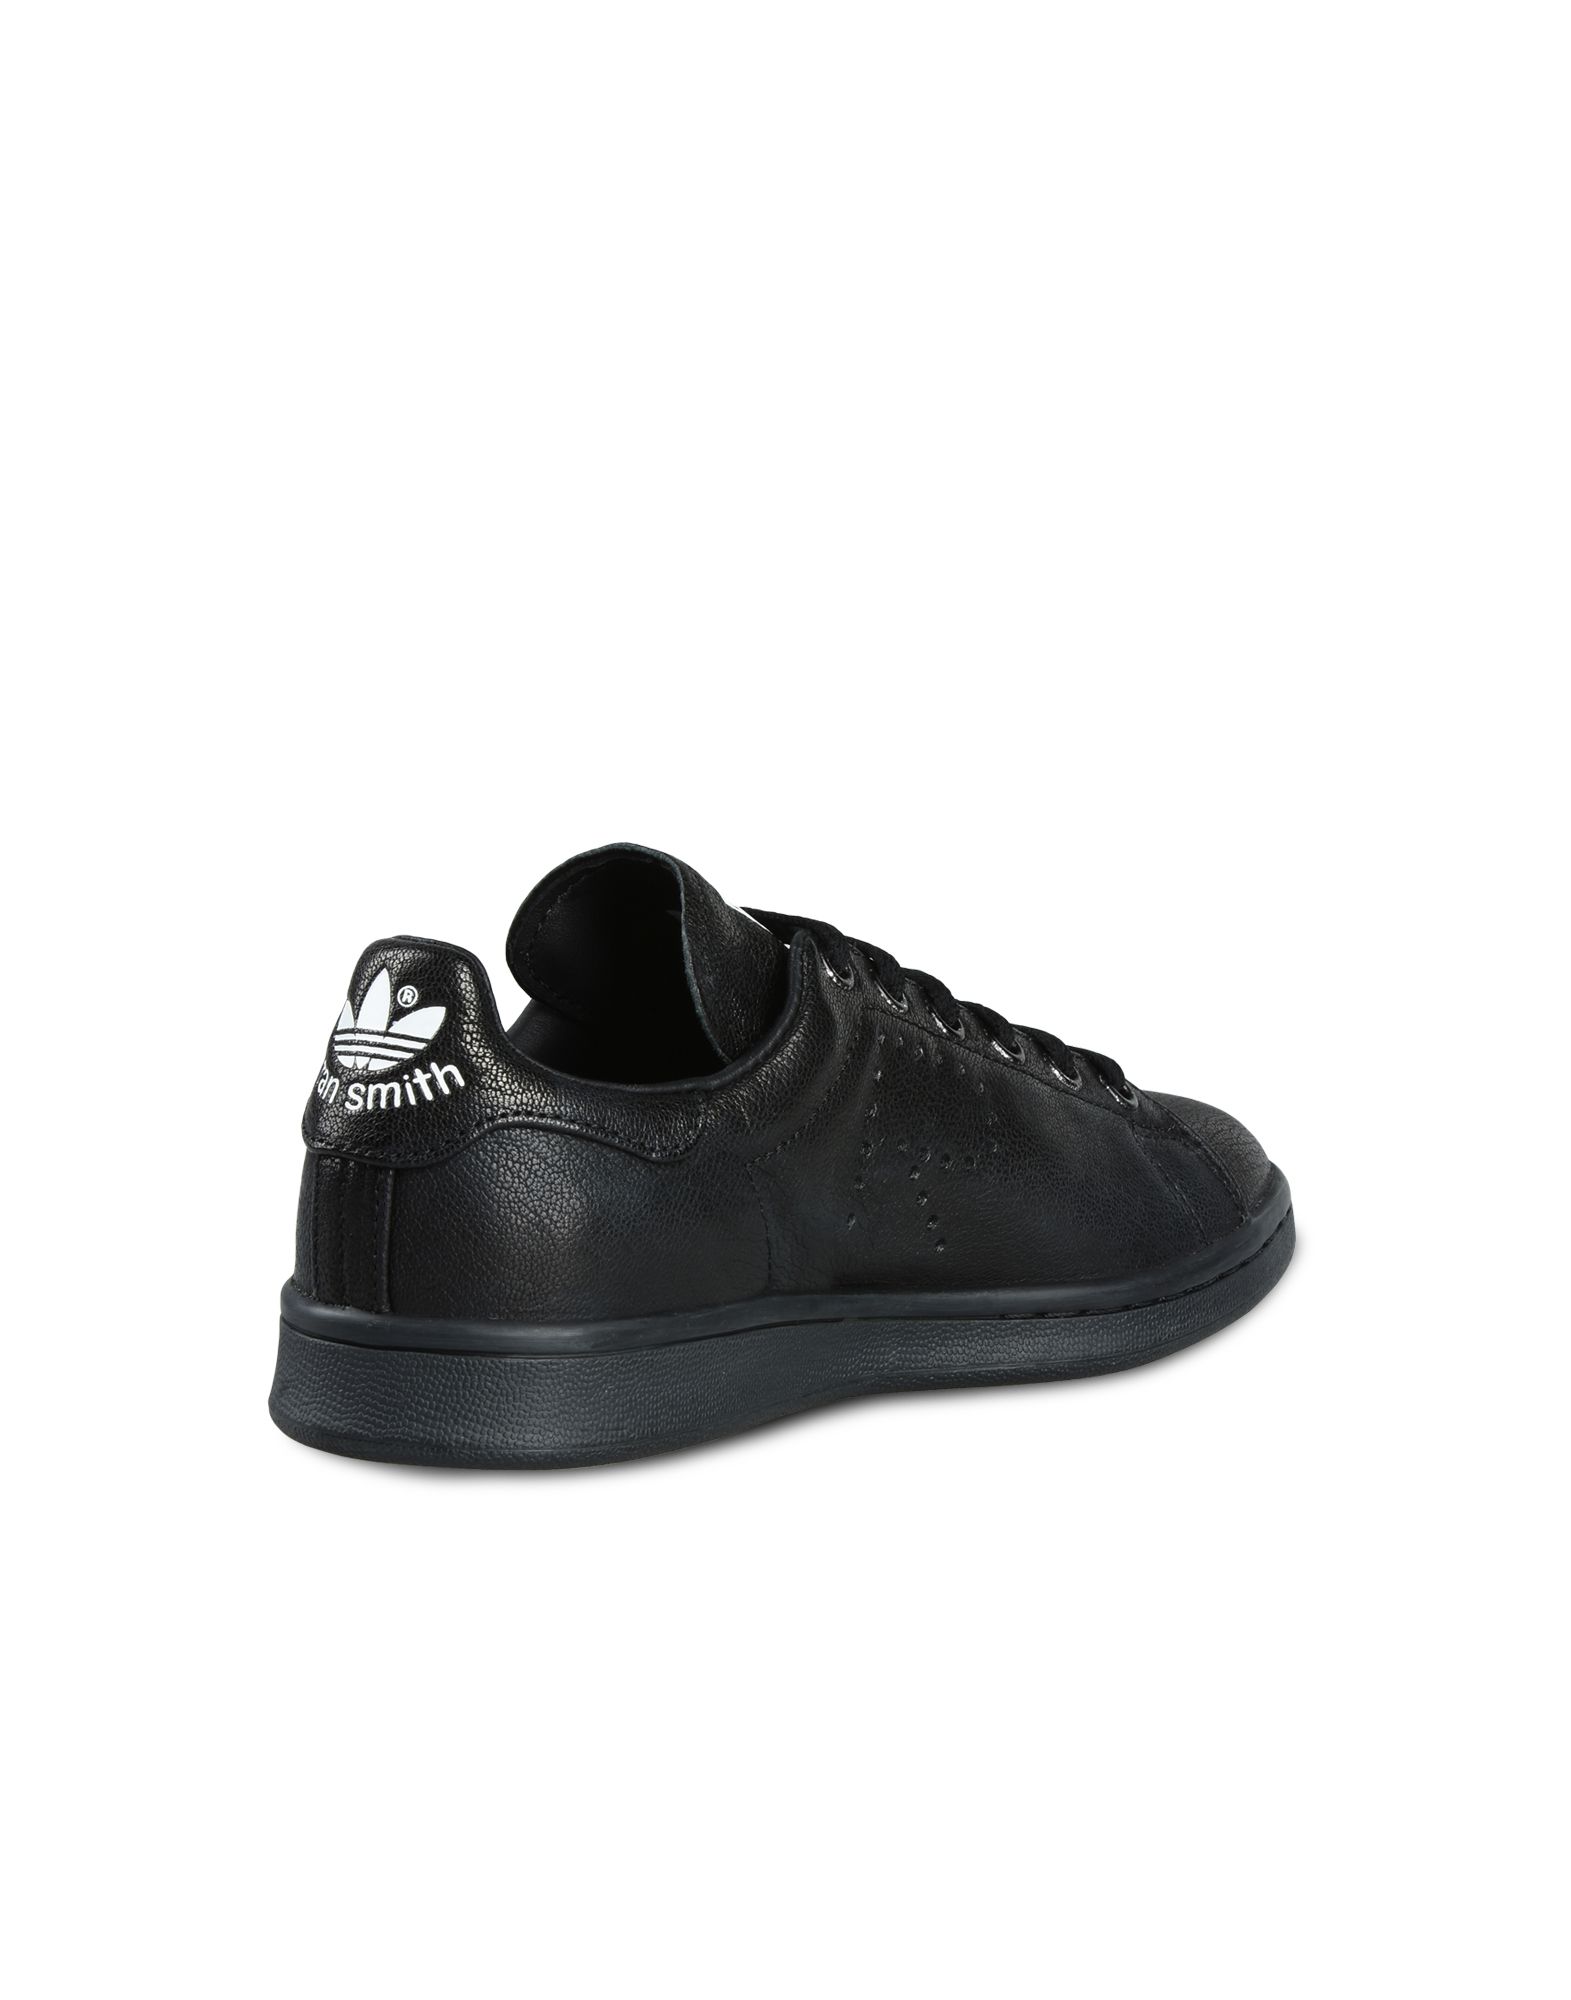 Adidas By RAF SIMONS STAN SMITH AGED Sneakers | Adidas Y-3 Official Store